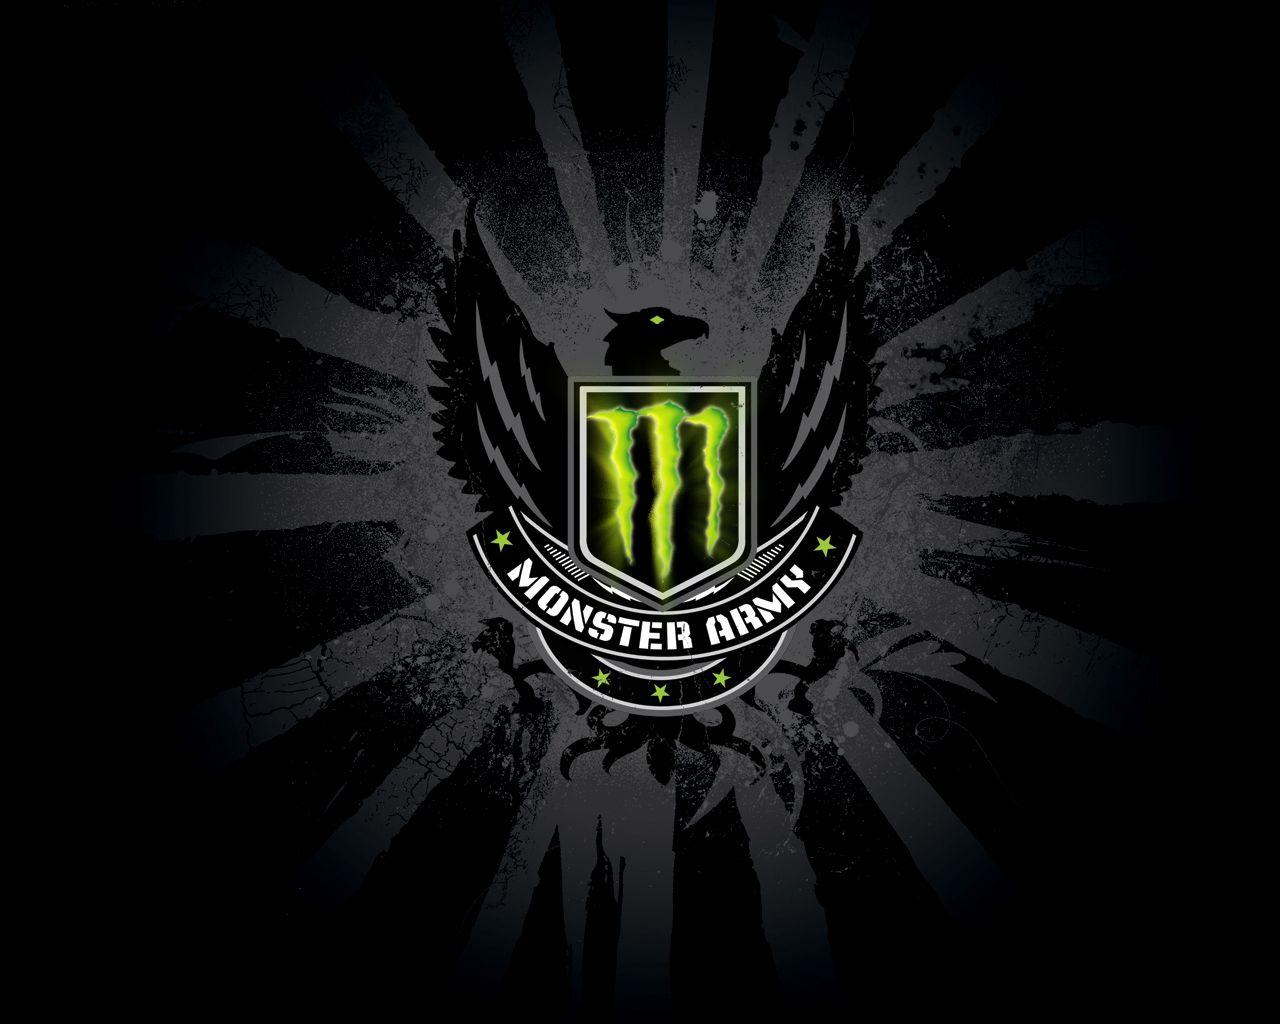 Monster Army Logo - Download desktop wallpaper Monster Army logo with a black eagle